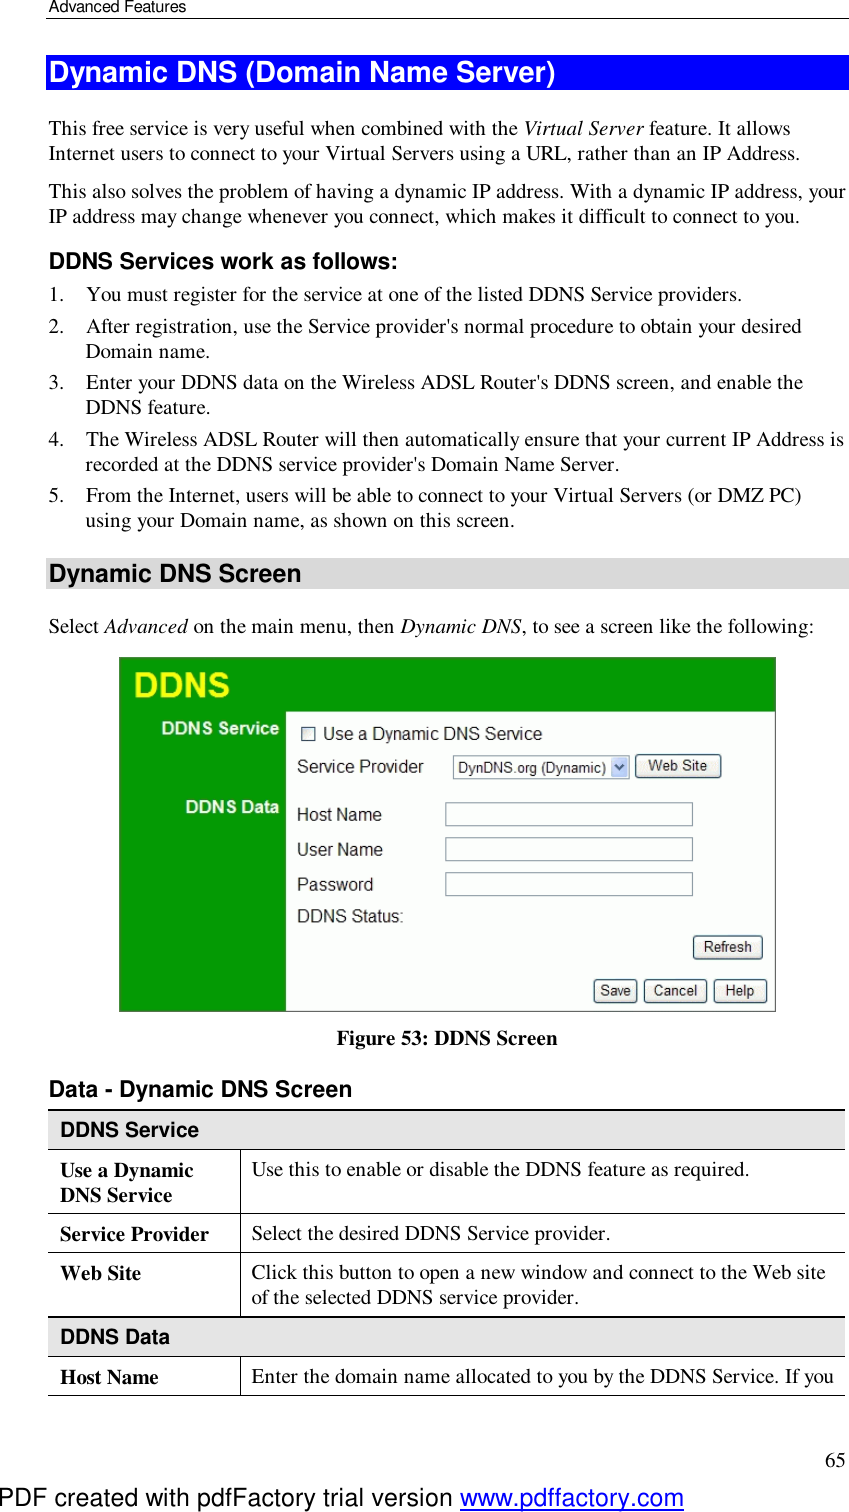 Advanced Features 65 Dynamic DNS (Domain Name Server) This free service is very useful when combined with the Virtual Server feature. It allows Internet users to connect to your Virtual Servers using a URL, rather than an IP Address. This also solves the problem of having a dynamic IP address. With a dynamic IP address, your IP address may change whenever you connect, which makes it difficult to connect to you. DDNS Services work as follows: 1. You must register for the service at one of the listed DDNS Service providers. 2. After registration, use the Service provider&apos;s normal procedure to obtain your desired Domain name. 3. Enter your DDNS data on the Wireless ADSL Router&apos;s DDNS screen, and enable the DDNS feature. 4. The Wireless ADSL Router will then automatically ensure that your current IP Address is recorded at the DDNS service provider&apos;s Domain Name Server. 5. From the Internet, users will be able to connect to your Virtual Servers (or DMZ PC) using your Domain name, as shown on this screen. Dynamic DNS Screen Select Advanced on the main menu, then Dynamic DNS, to see a screen like the following:  Figure 53: DDNS Screen Data - Dynamic DNS Screen DDNS Service Use a Dynamic DNS Service  Use this to enable or disable the DDNS feature as required. Service Provider  Select the desired DDNS Service provider. Web Site  Click this button to open a new window and connect to the Web site of the selected DDNS service provider. DDNS Data Host Name  Enter the domain name allocated to you by the DDNS Service. If you PDF created with pdfFactory trial version www.pdffactory.com